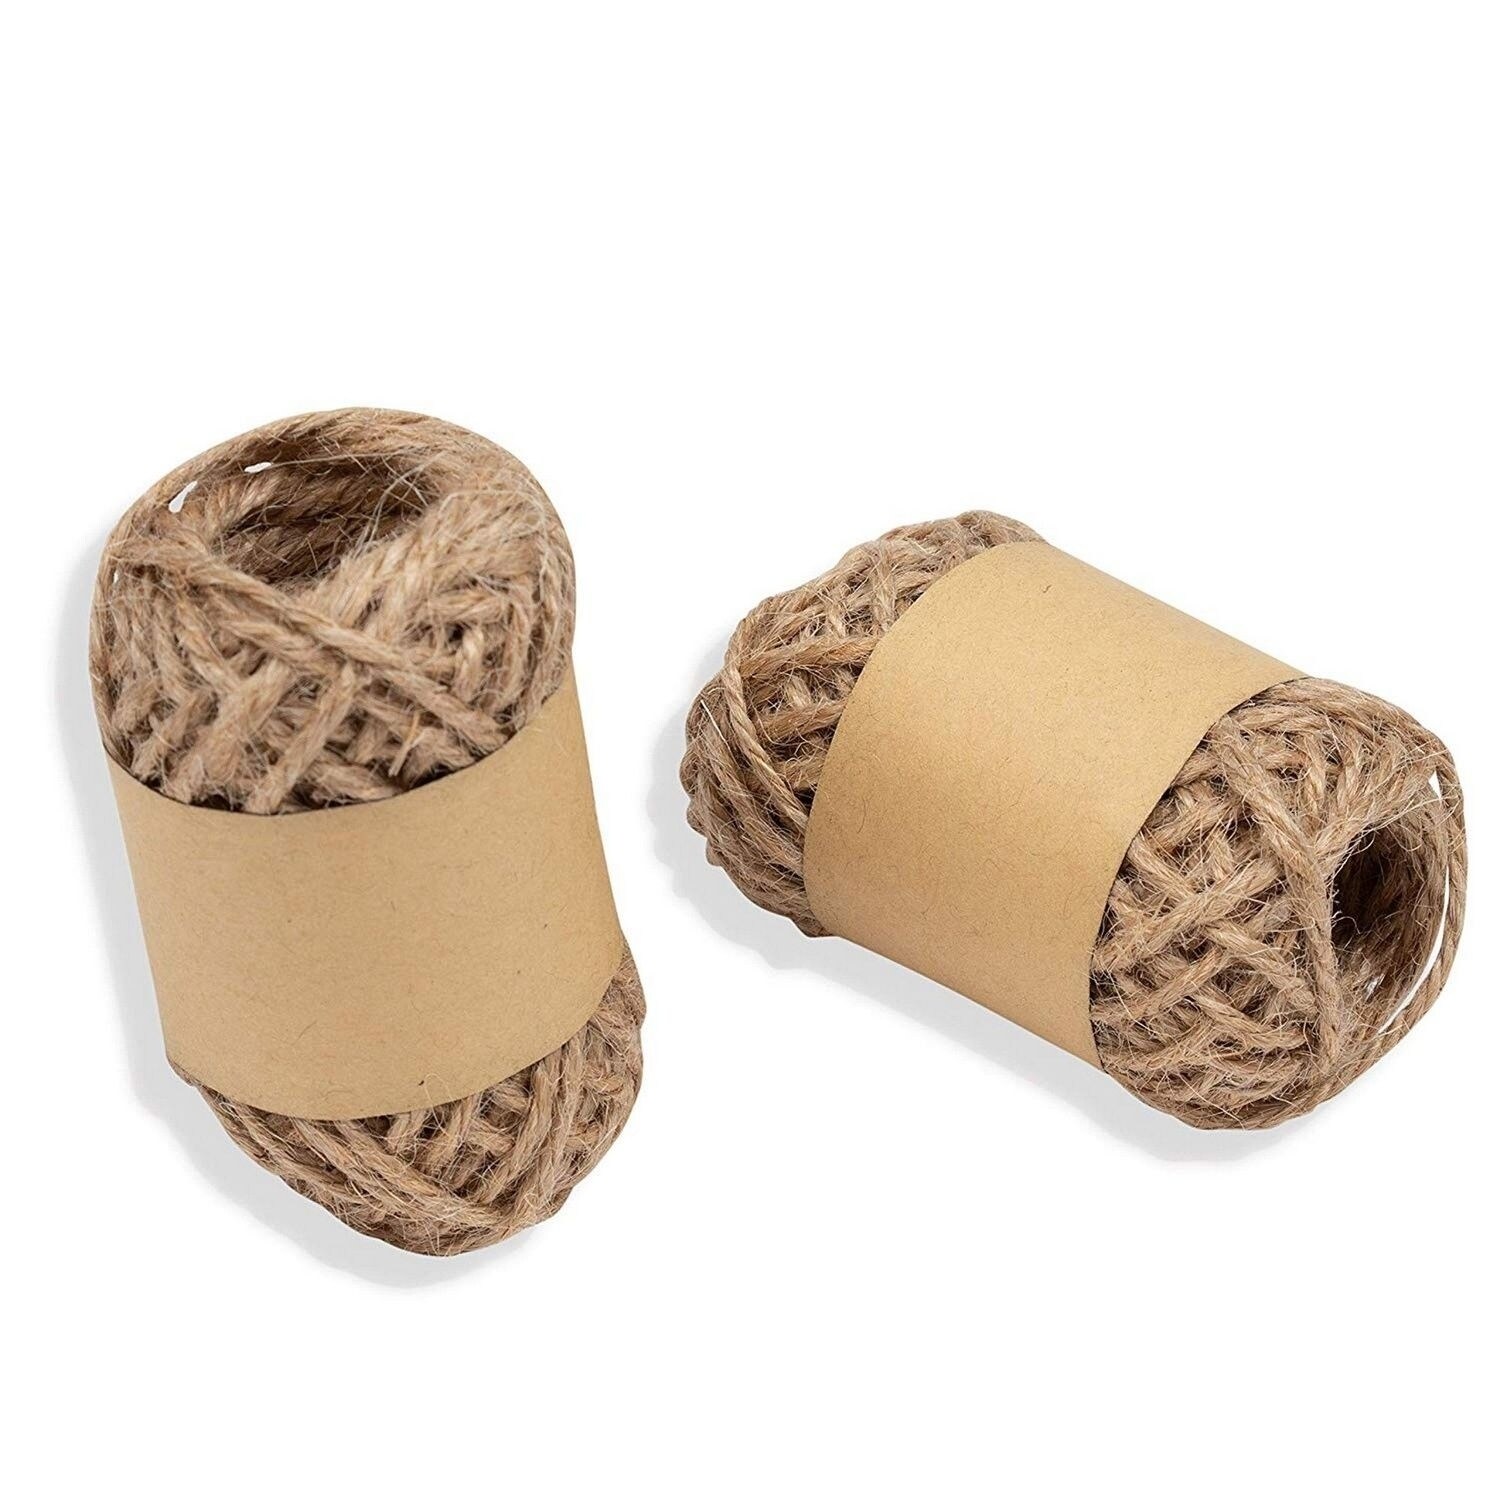 24-Roll 11 Yards Natural Jute Rope Cord Twine String Crafts DIY Decoration  - 11 Yards - Bed Bath & Beyond - 29775071